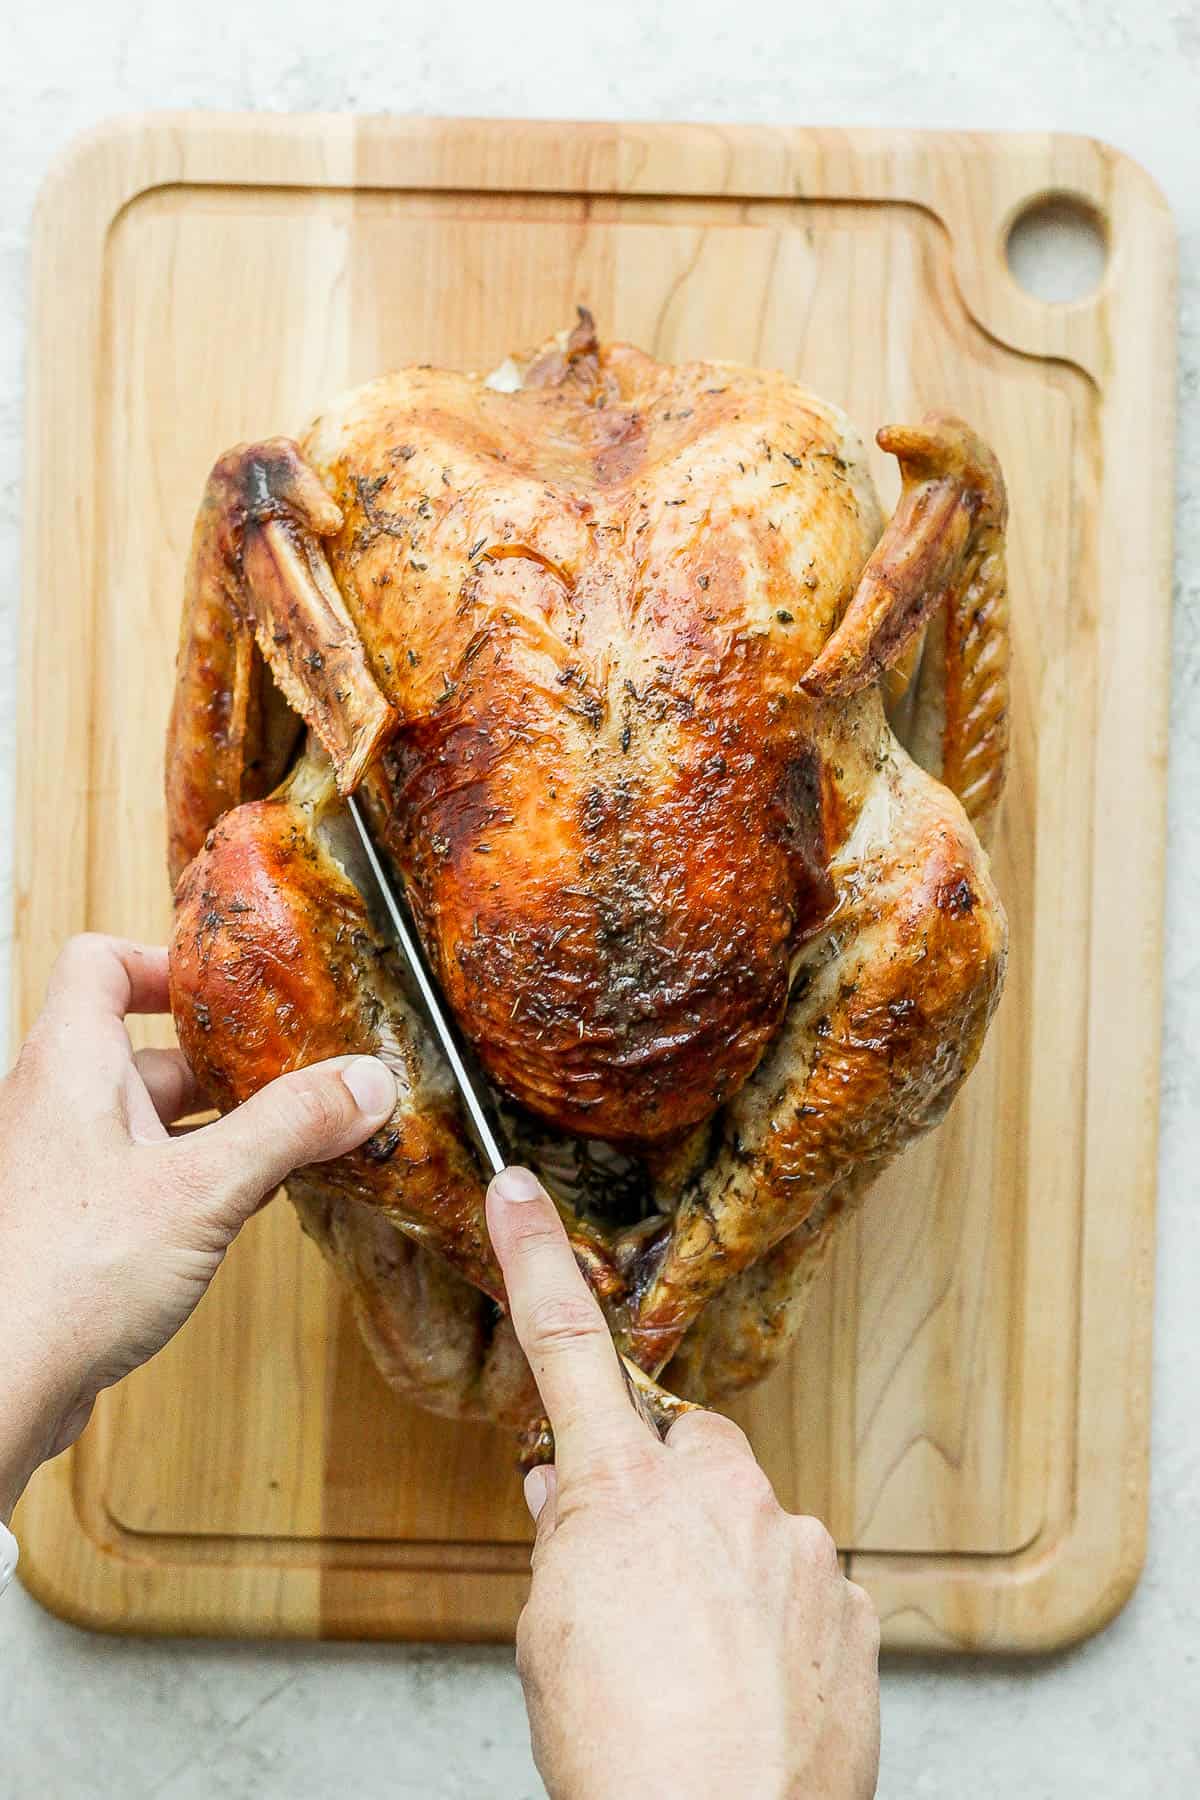 A large, sharp knife cutting the skin between the leg and breast of the turkey.